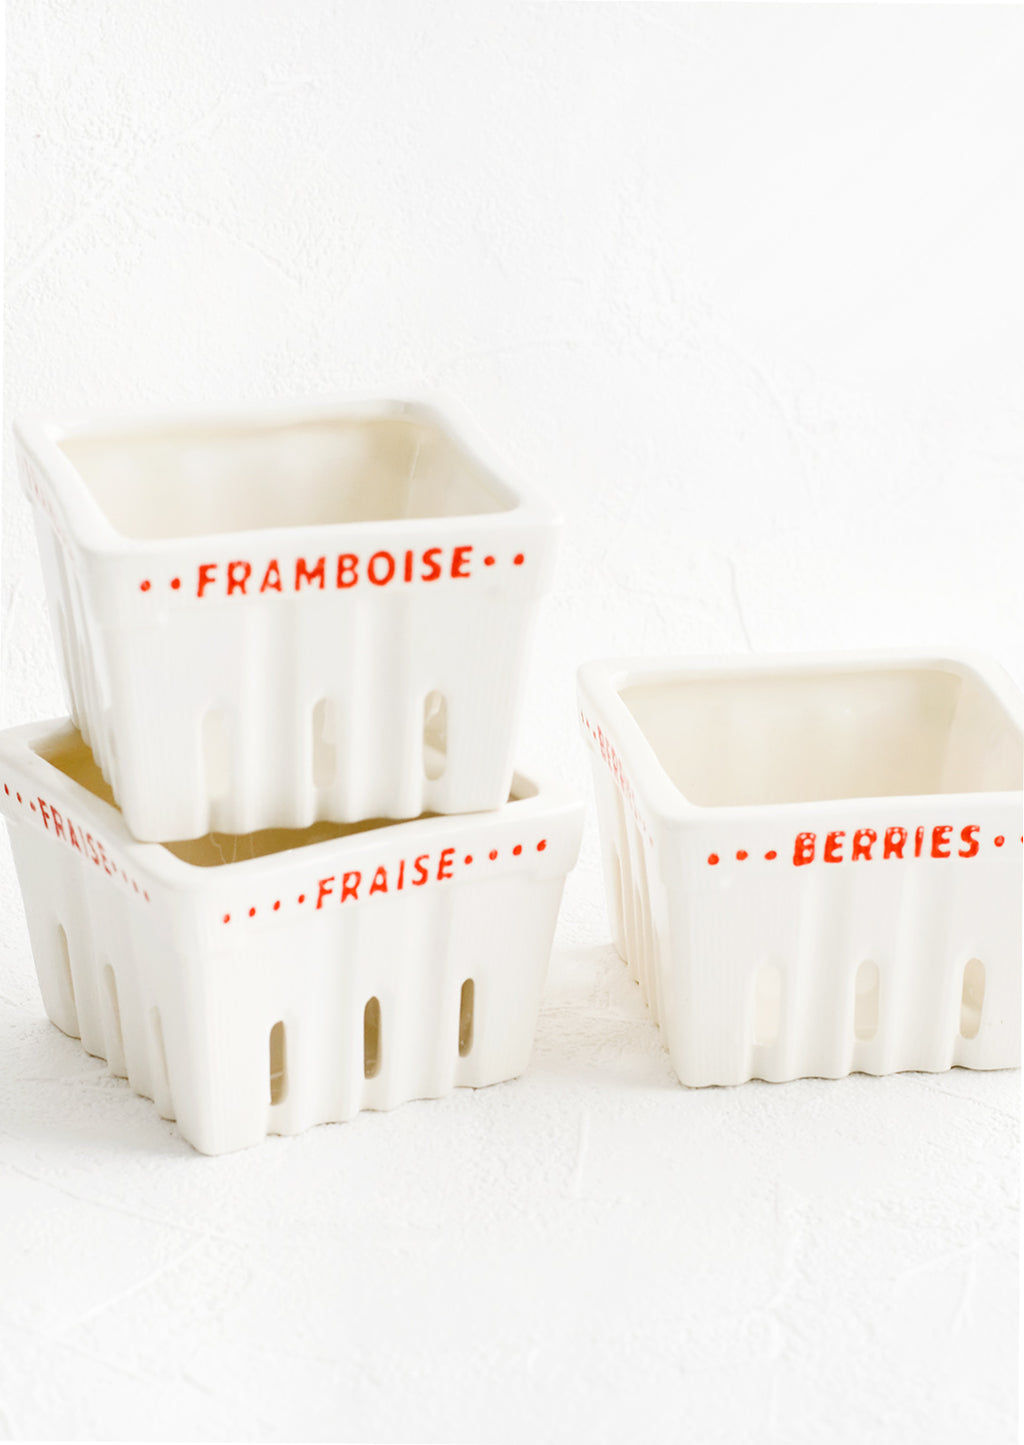 2: Ceramic berry baskets made to look like the disposable variety, but in white ceramic with red letters in French.